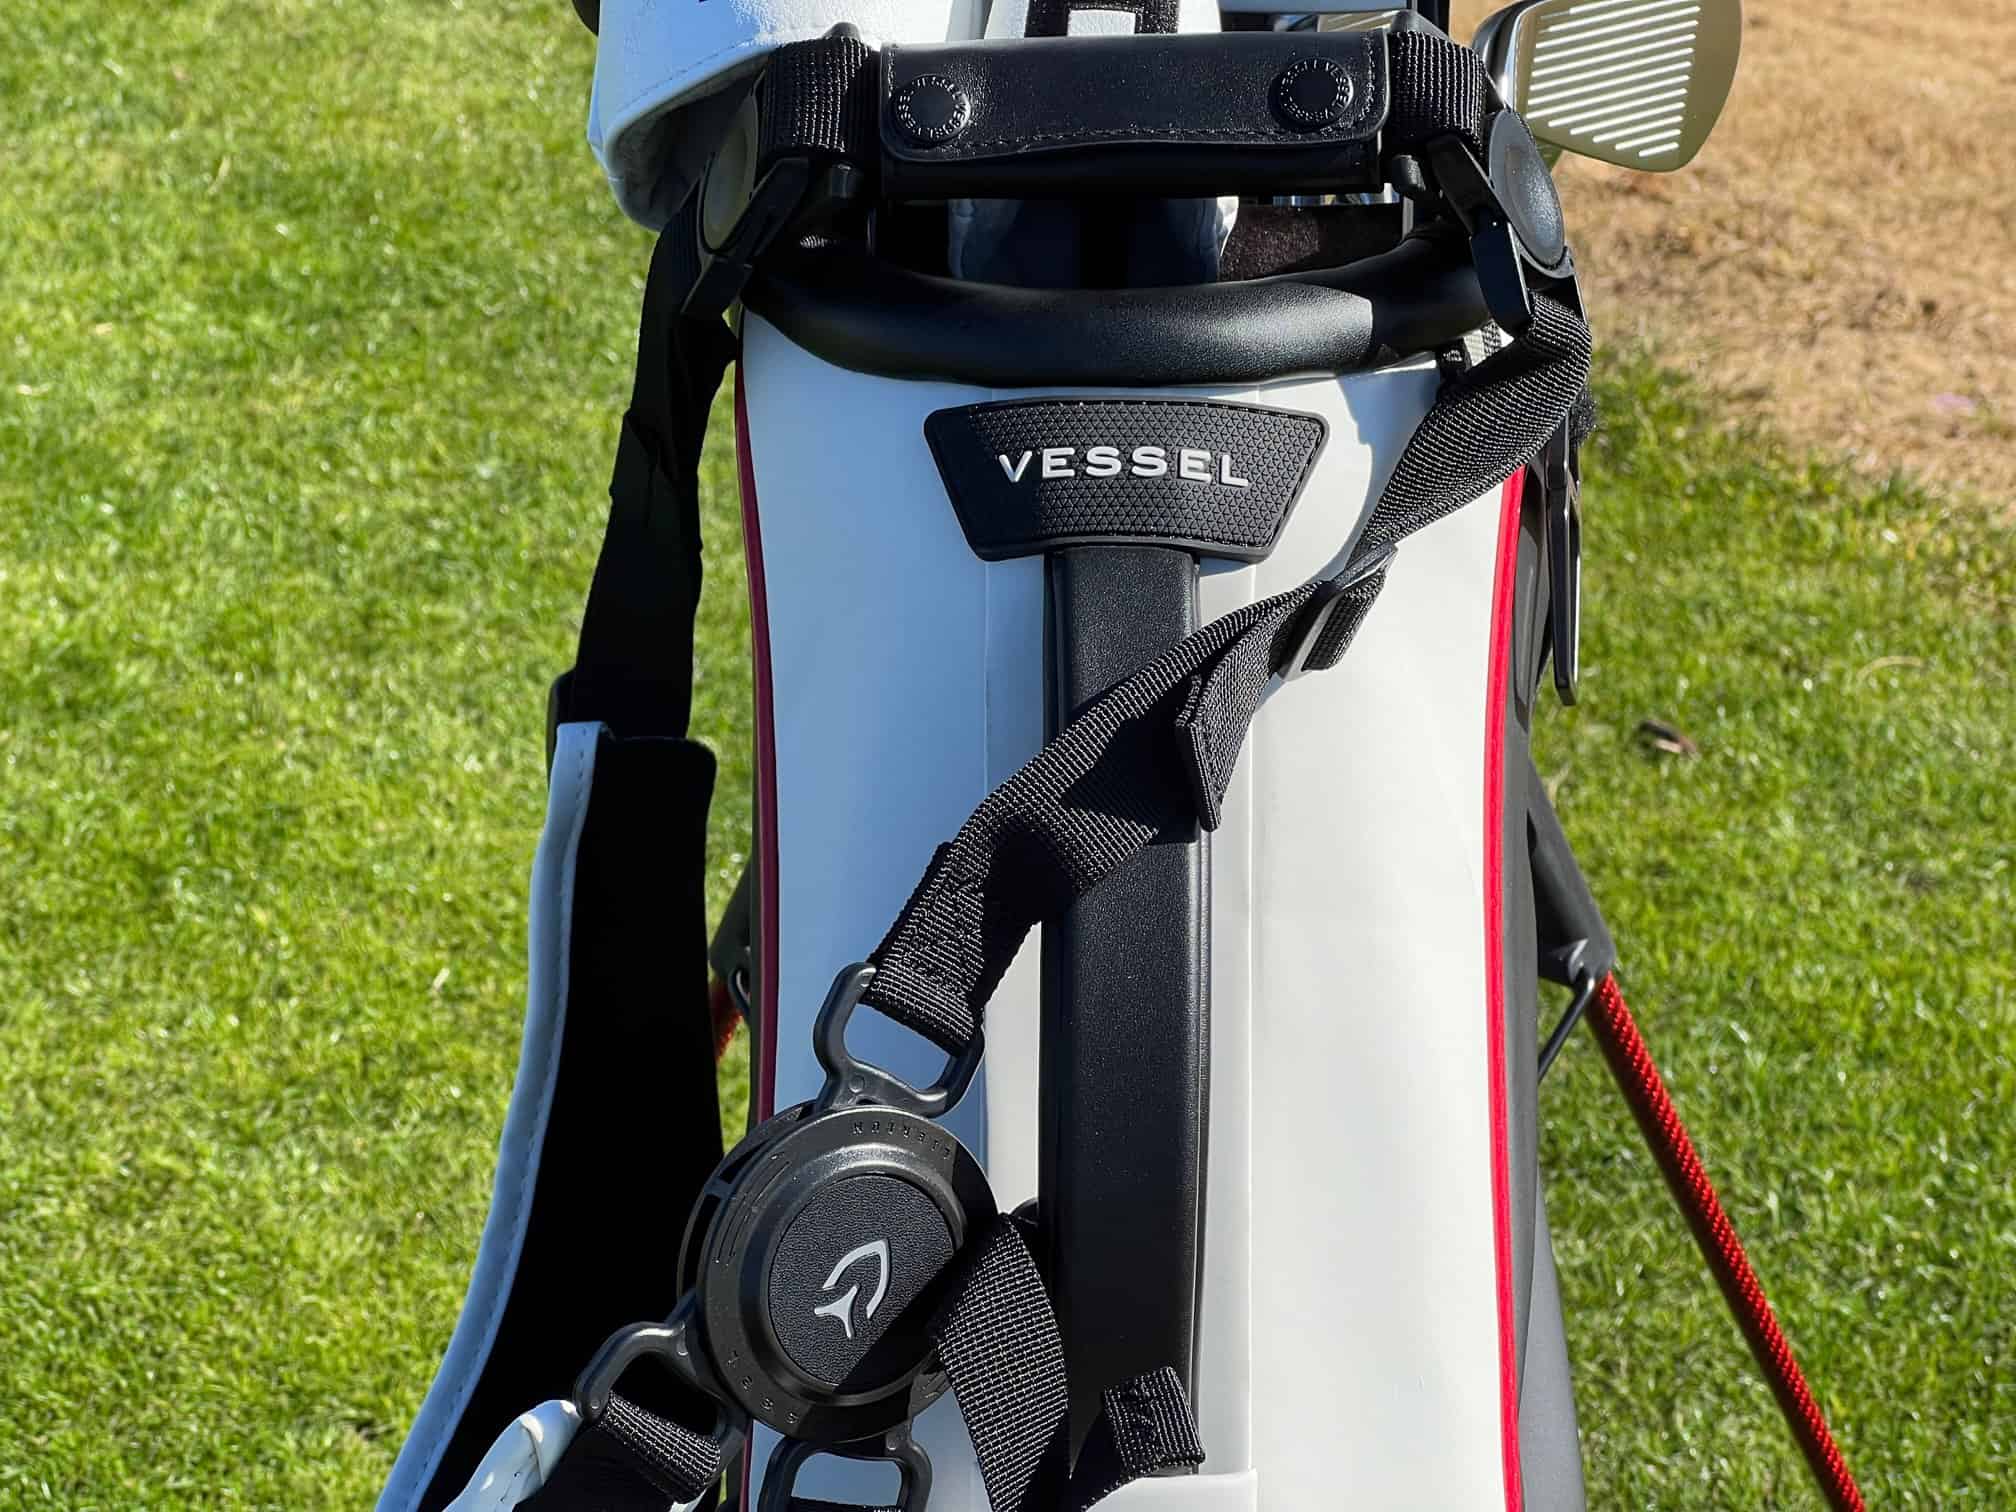 Vessel VLX 2.0 Golf Bag Review - Plugged In Golf